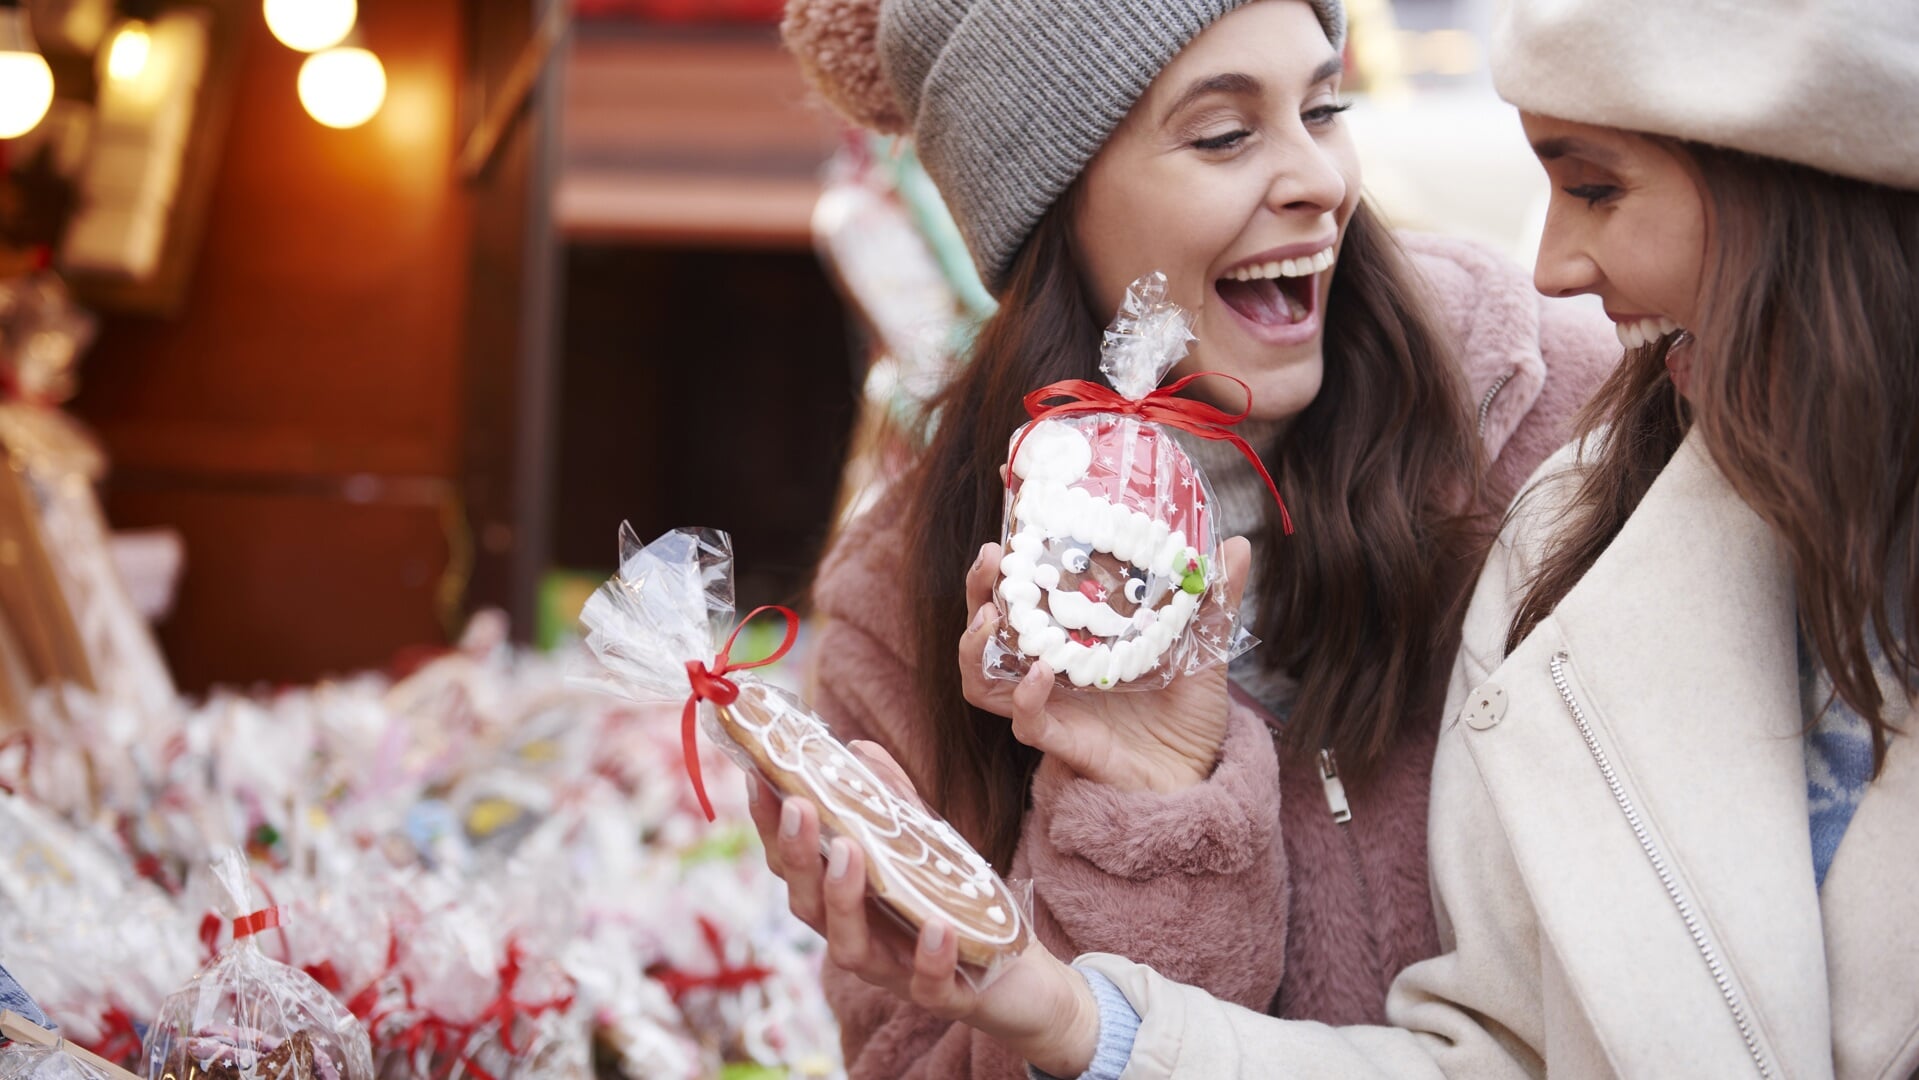 Two women buying ginger breads on Christmas market